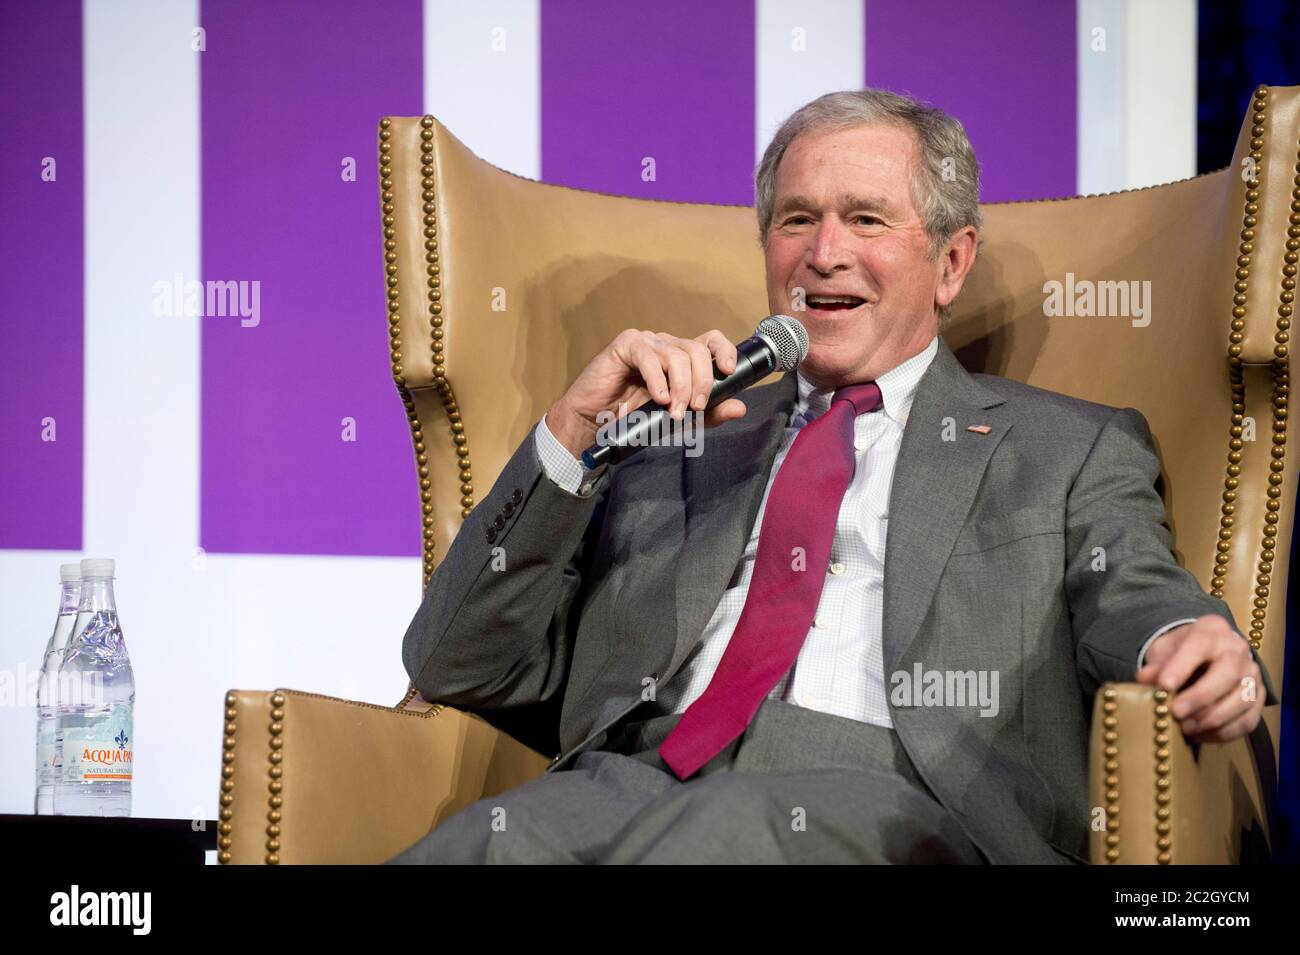 Dallas Texas USA, April 24 2014: Former U.S. President George W. Bush reflects on his challenging eight years in office during a one-hour speech at the Texas Apartment Association's annual convention. Bush is promoting his new book, 'Decision Points.'   ©Bob Daemmrich Stock Photo